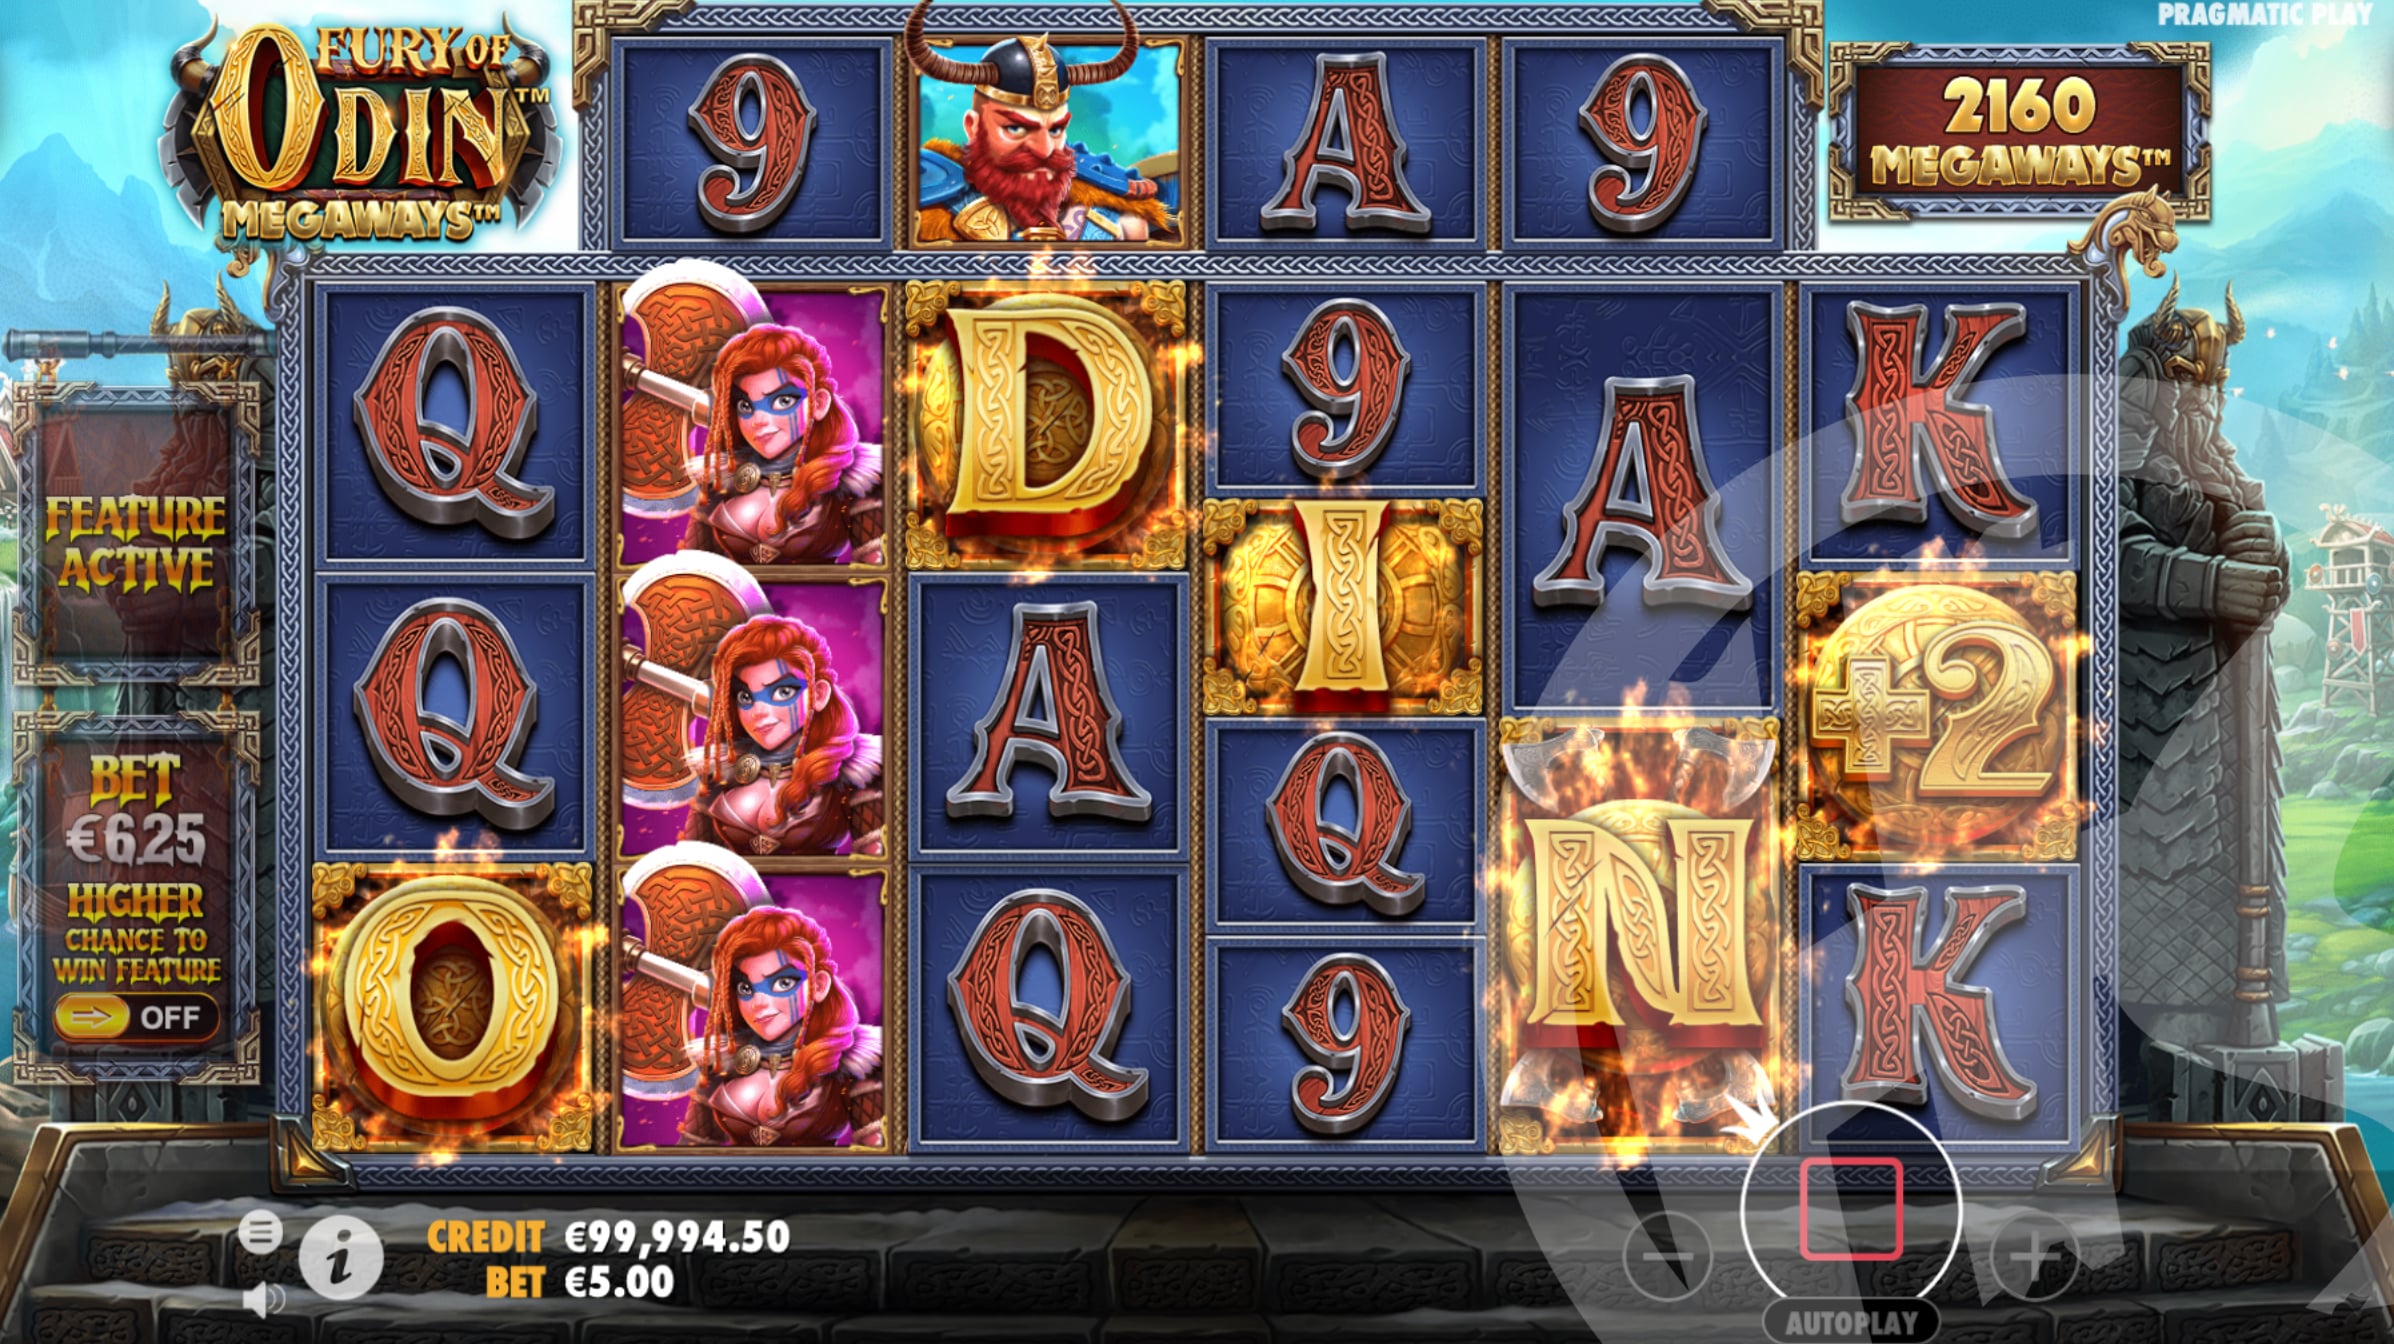 Land ODIN Scatters to Trigger 10 Free Spins